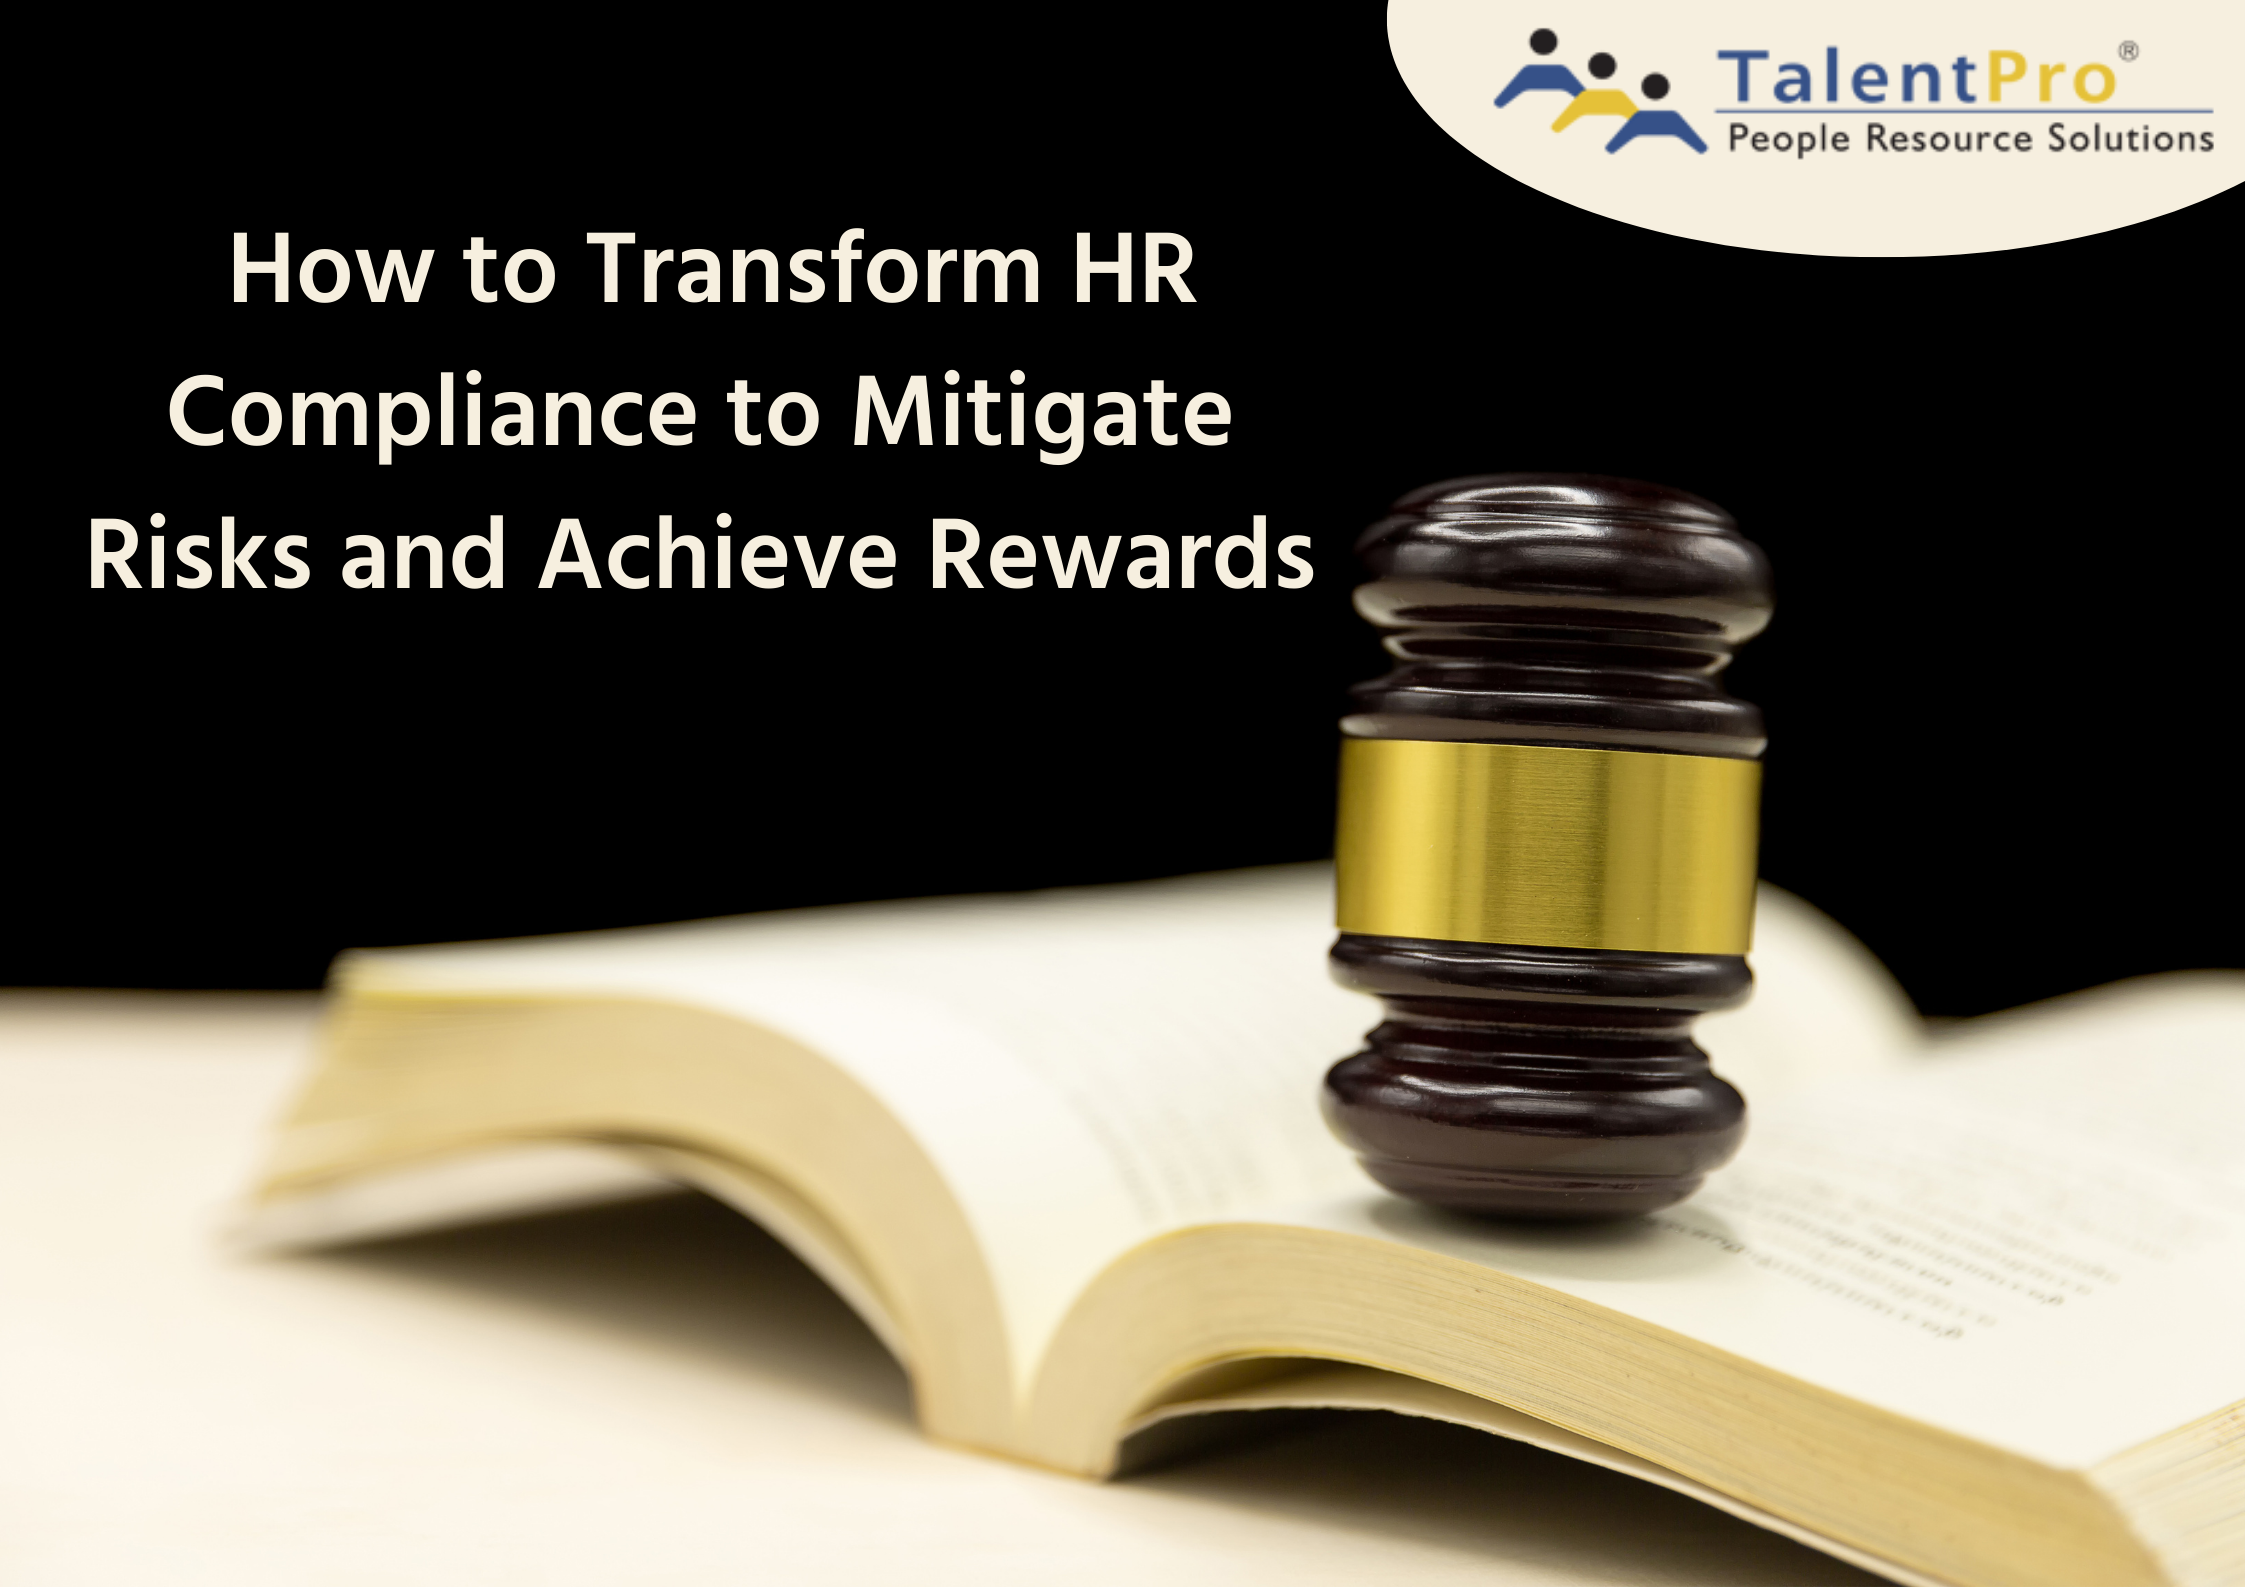 How to Transform HR Compliance to Mitigate Risks and Achieve Rewards